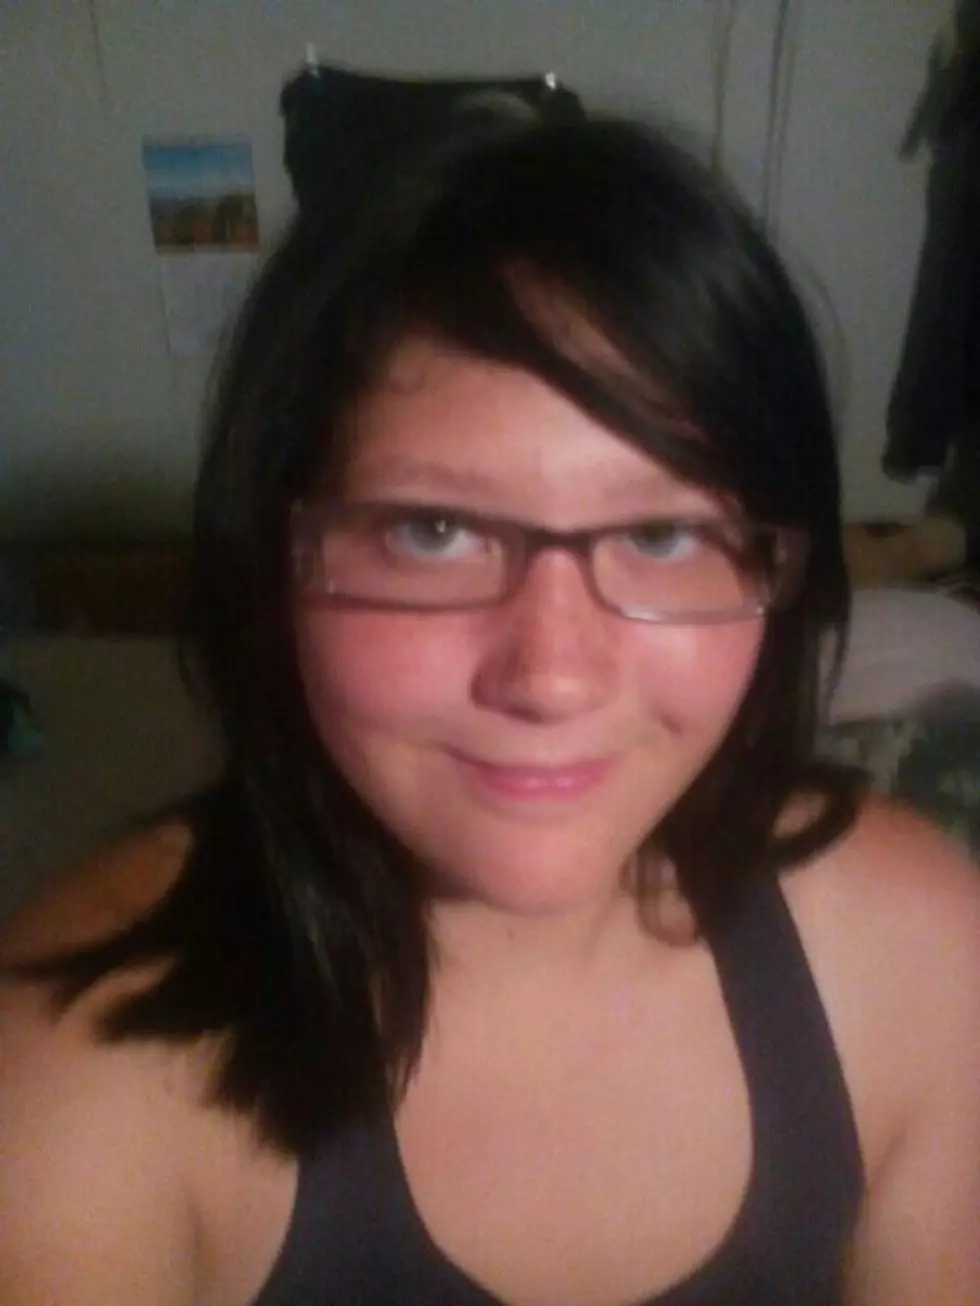 Pennsylvania State Police Look for Missing 19 Year Old